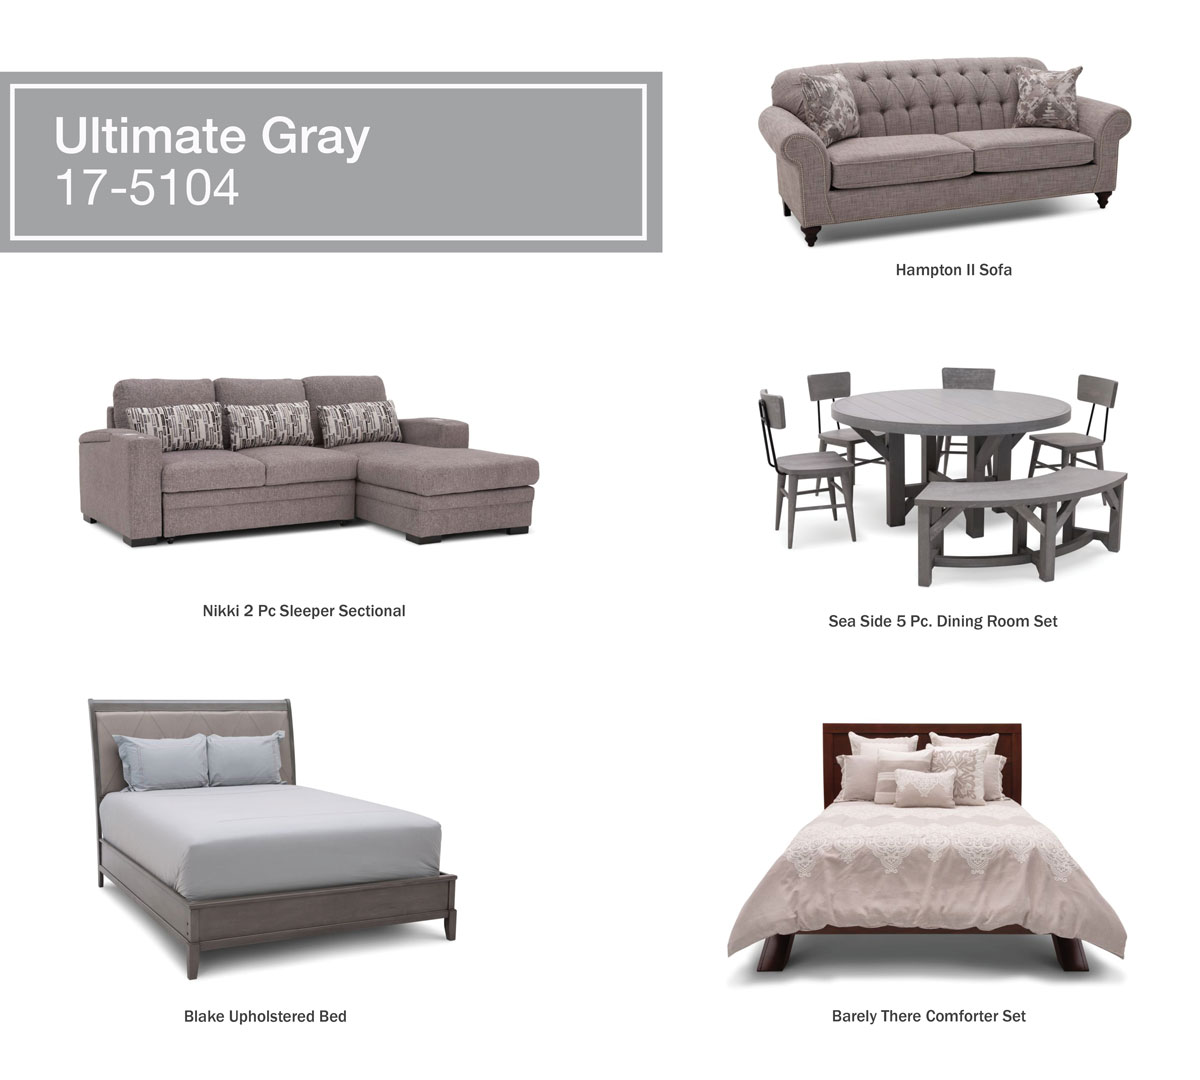 Ultimate Gray Products